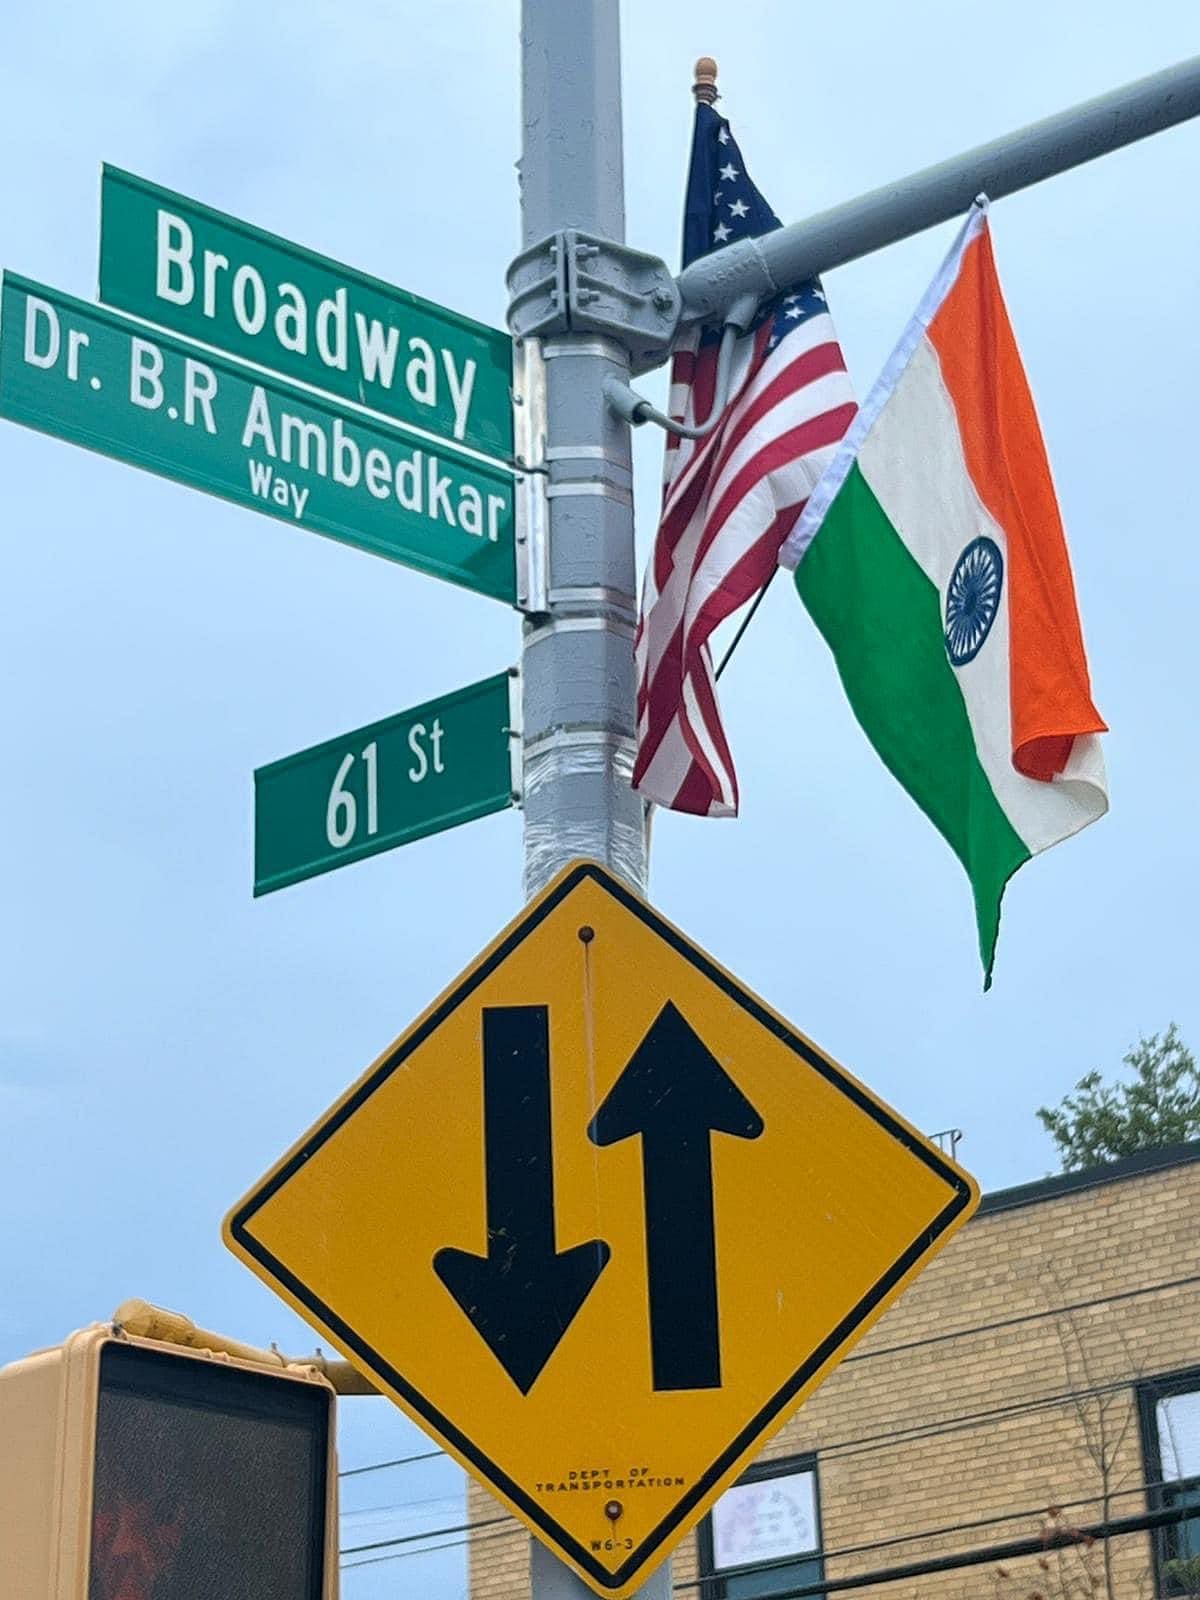 A street plate bearing the words 'Dr. B.R Ambedkar Way' was put up at the intersection of Broadway and 61st Street.